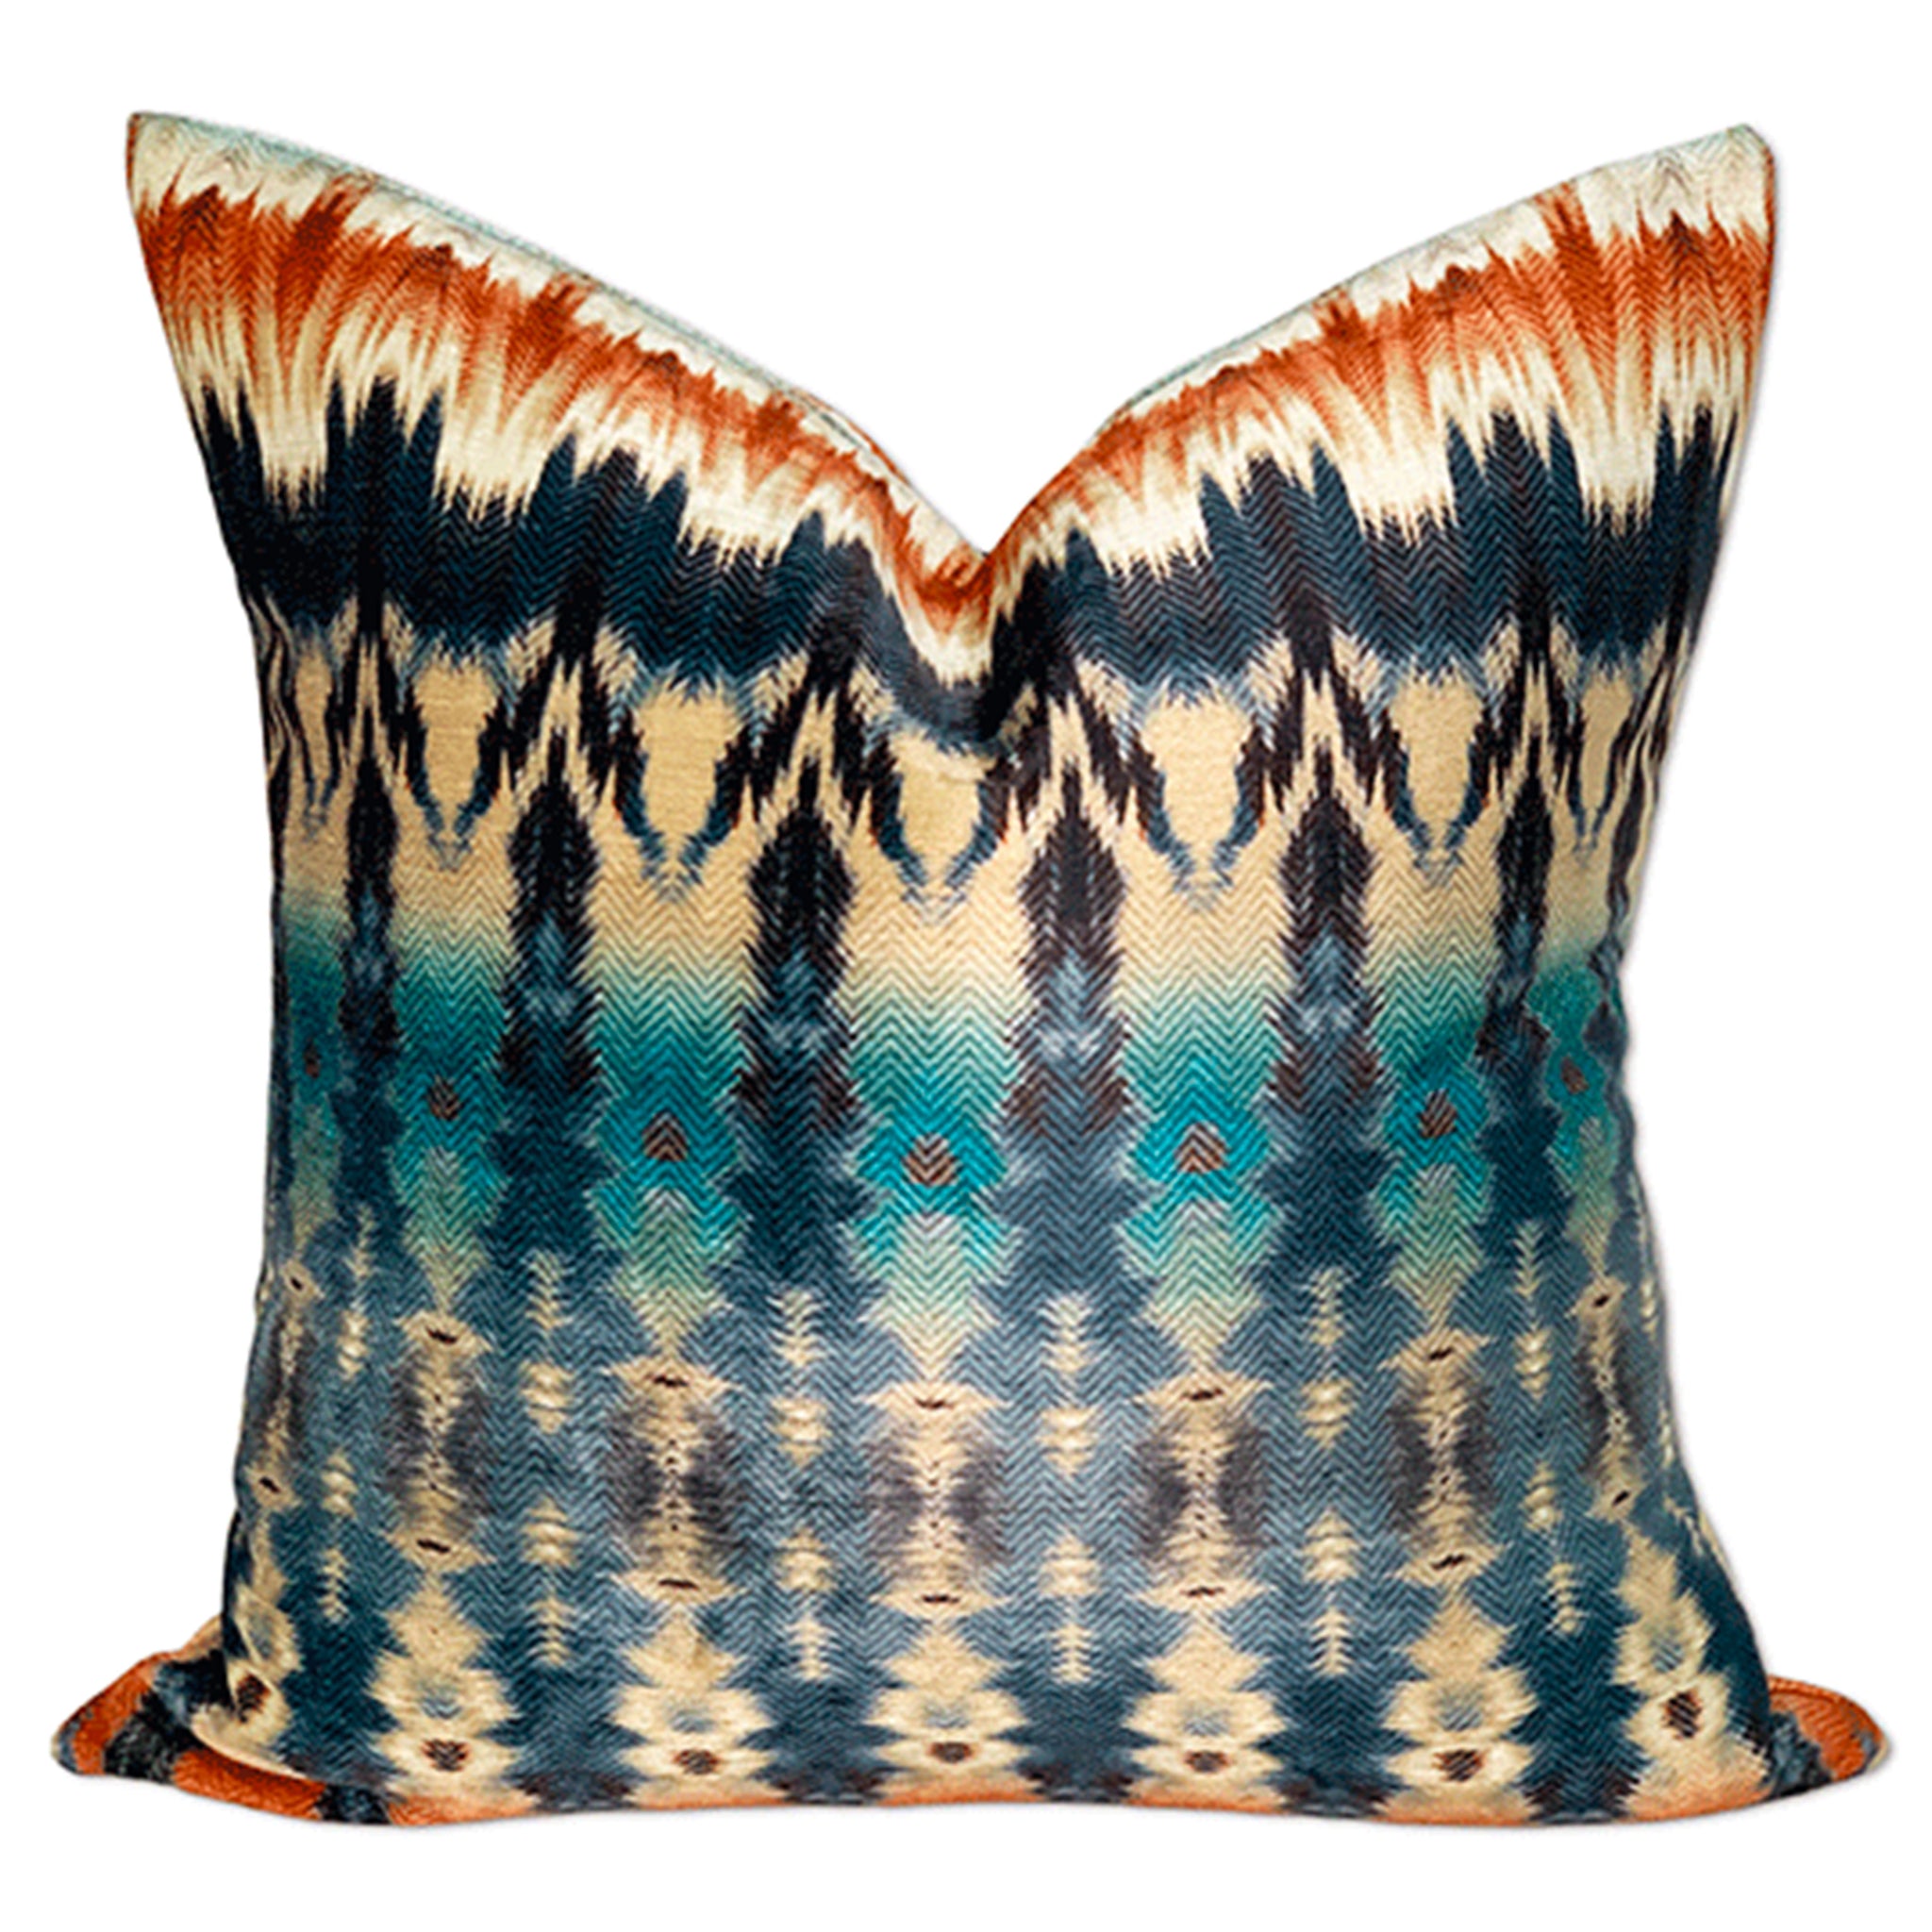 Ikat Fade Pillow Cover in Jewel